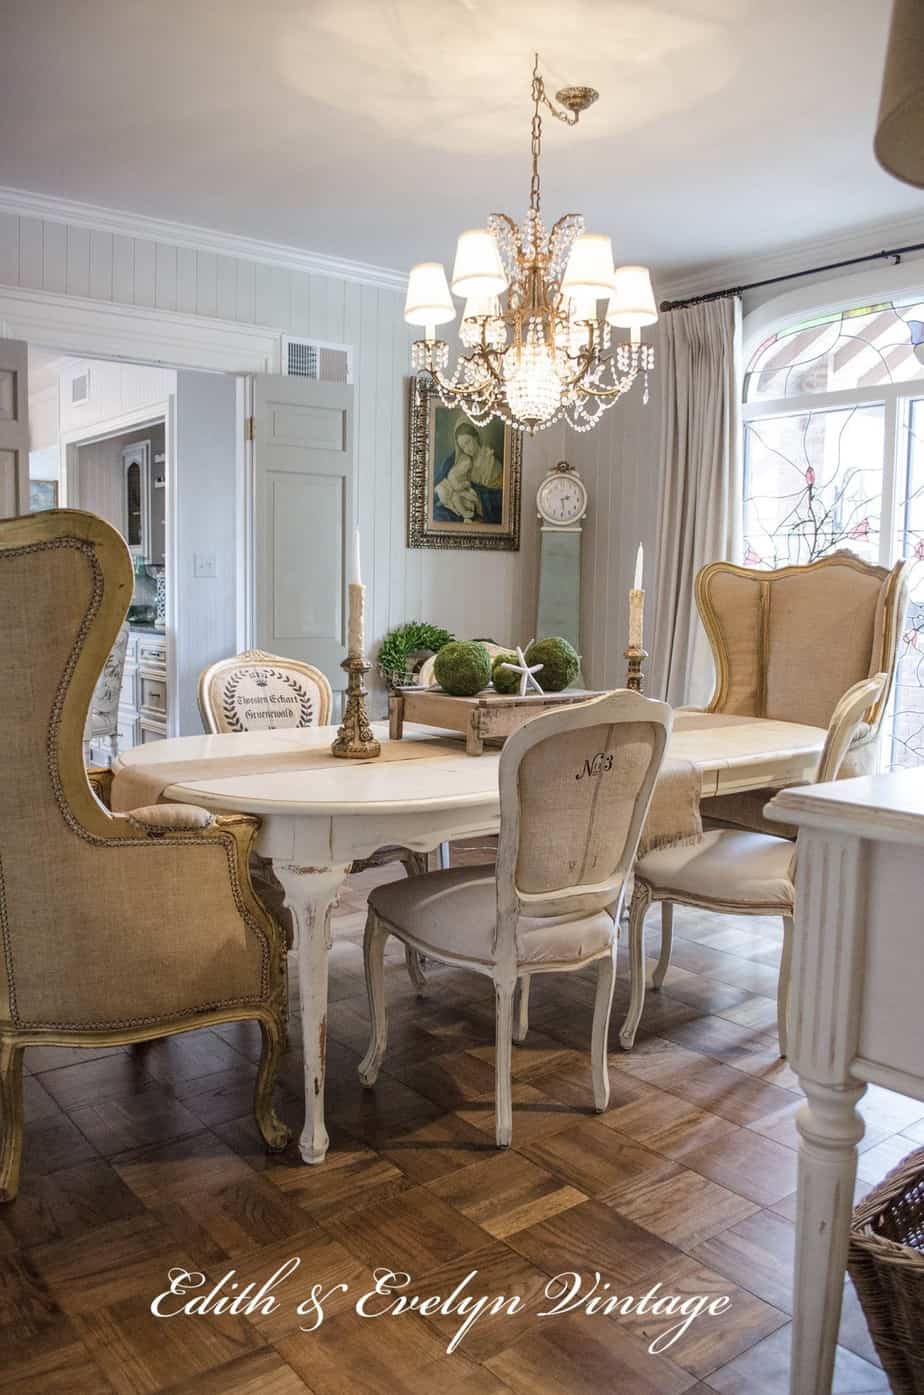 Love this beautiful home that's decorated in vintage French chateau style!